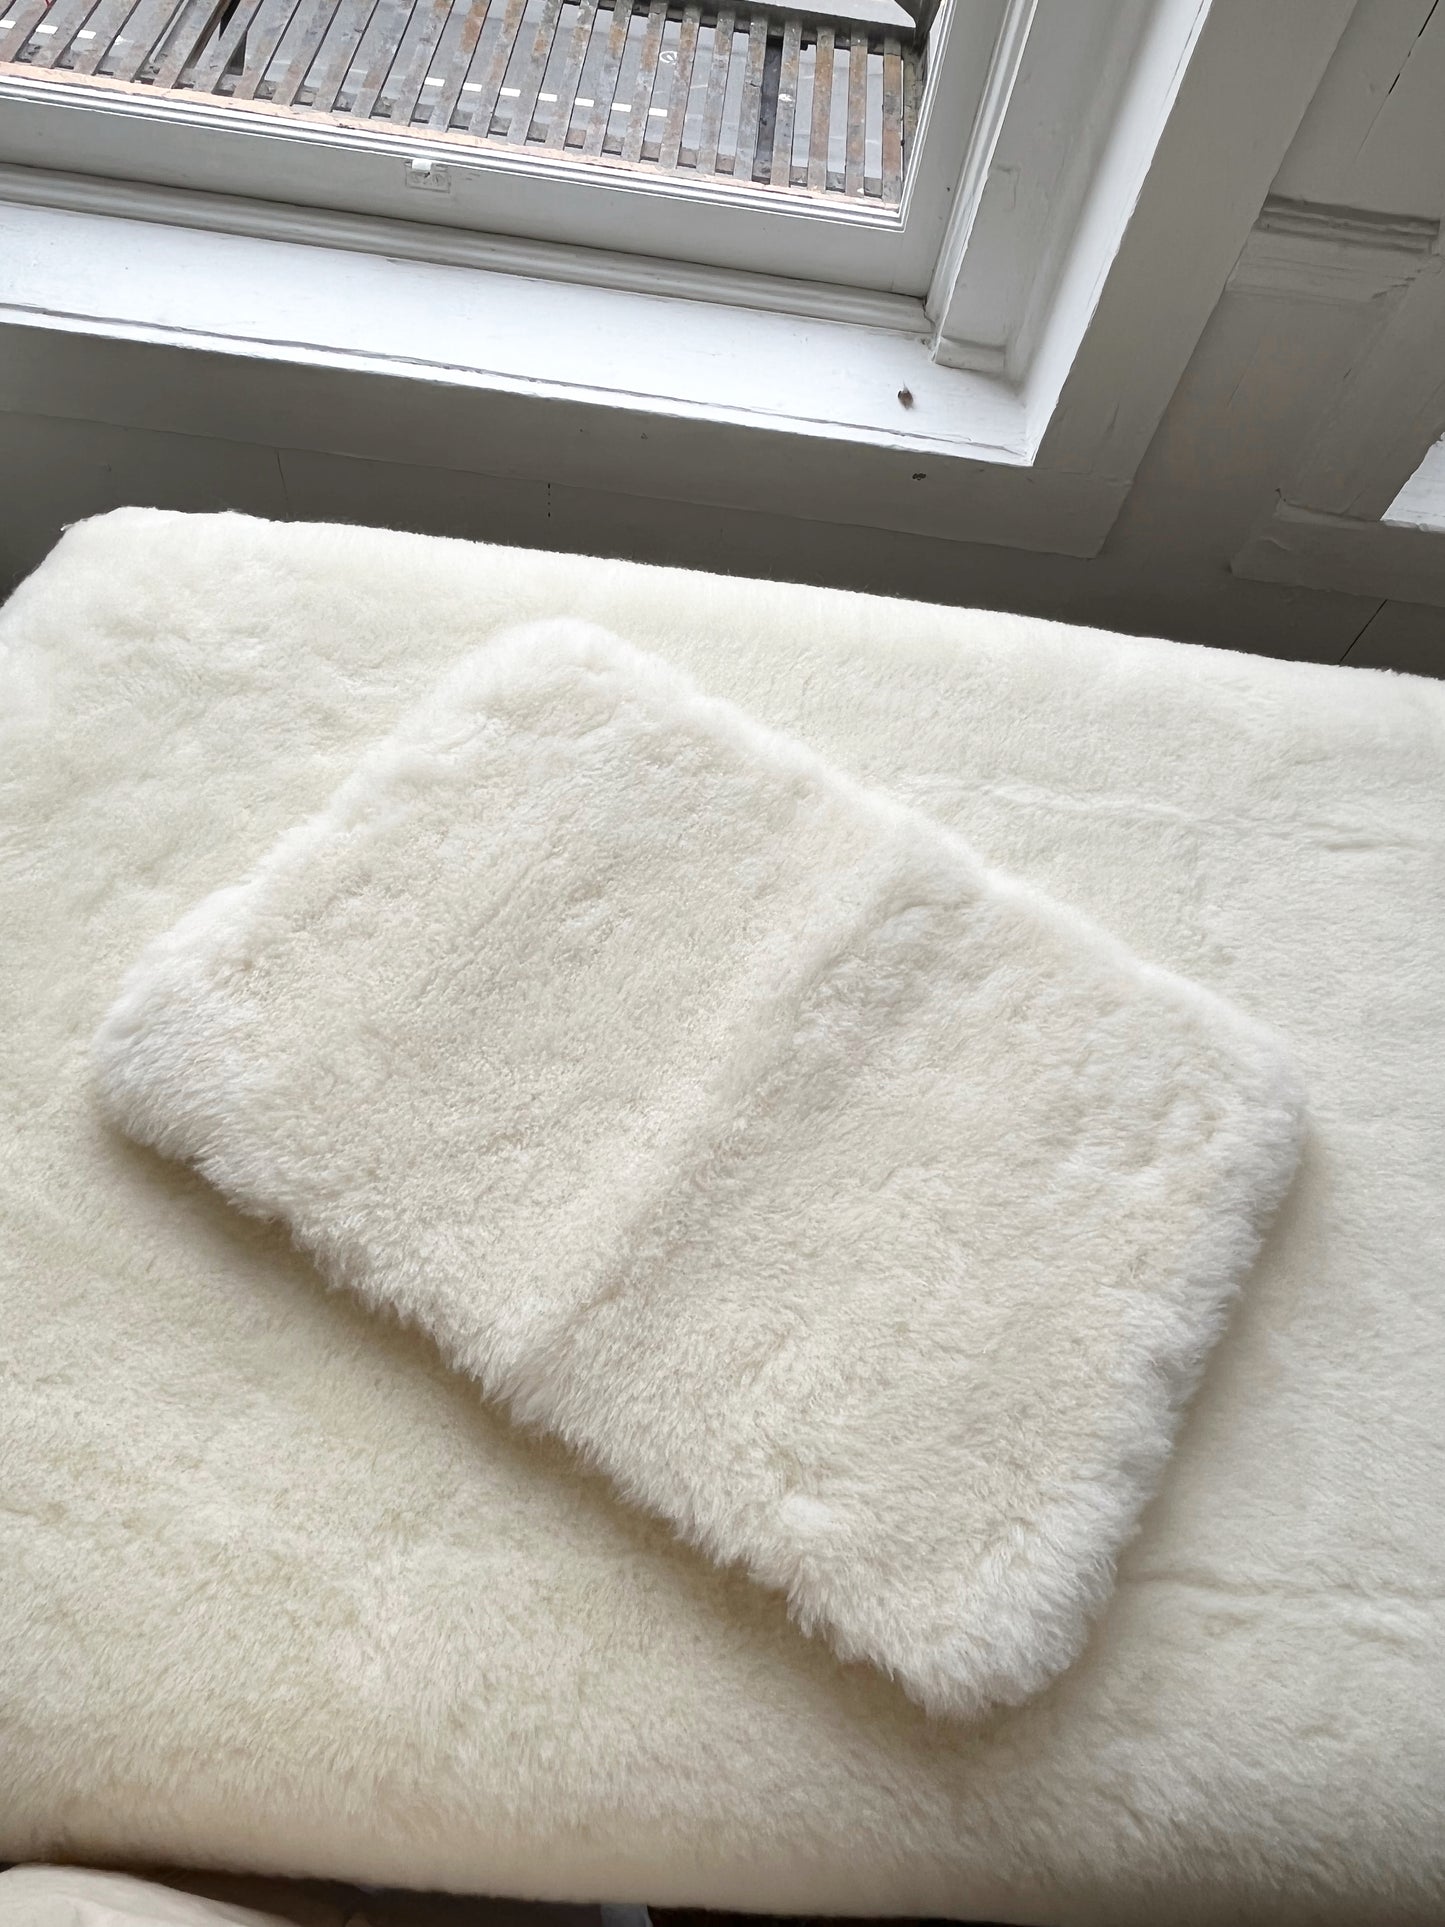 Wool Comfort Pads assorted sizes starting at